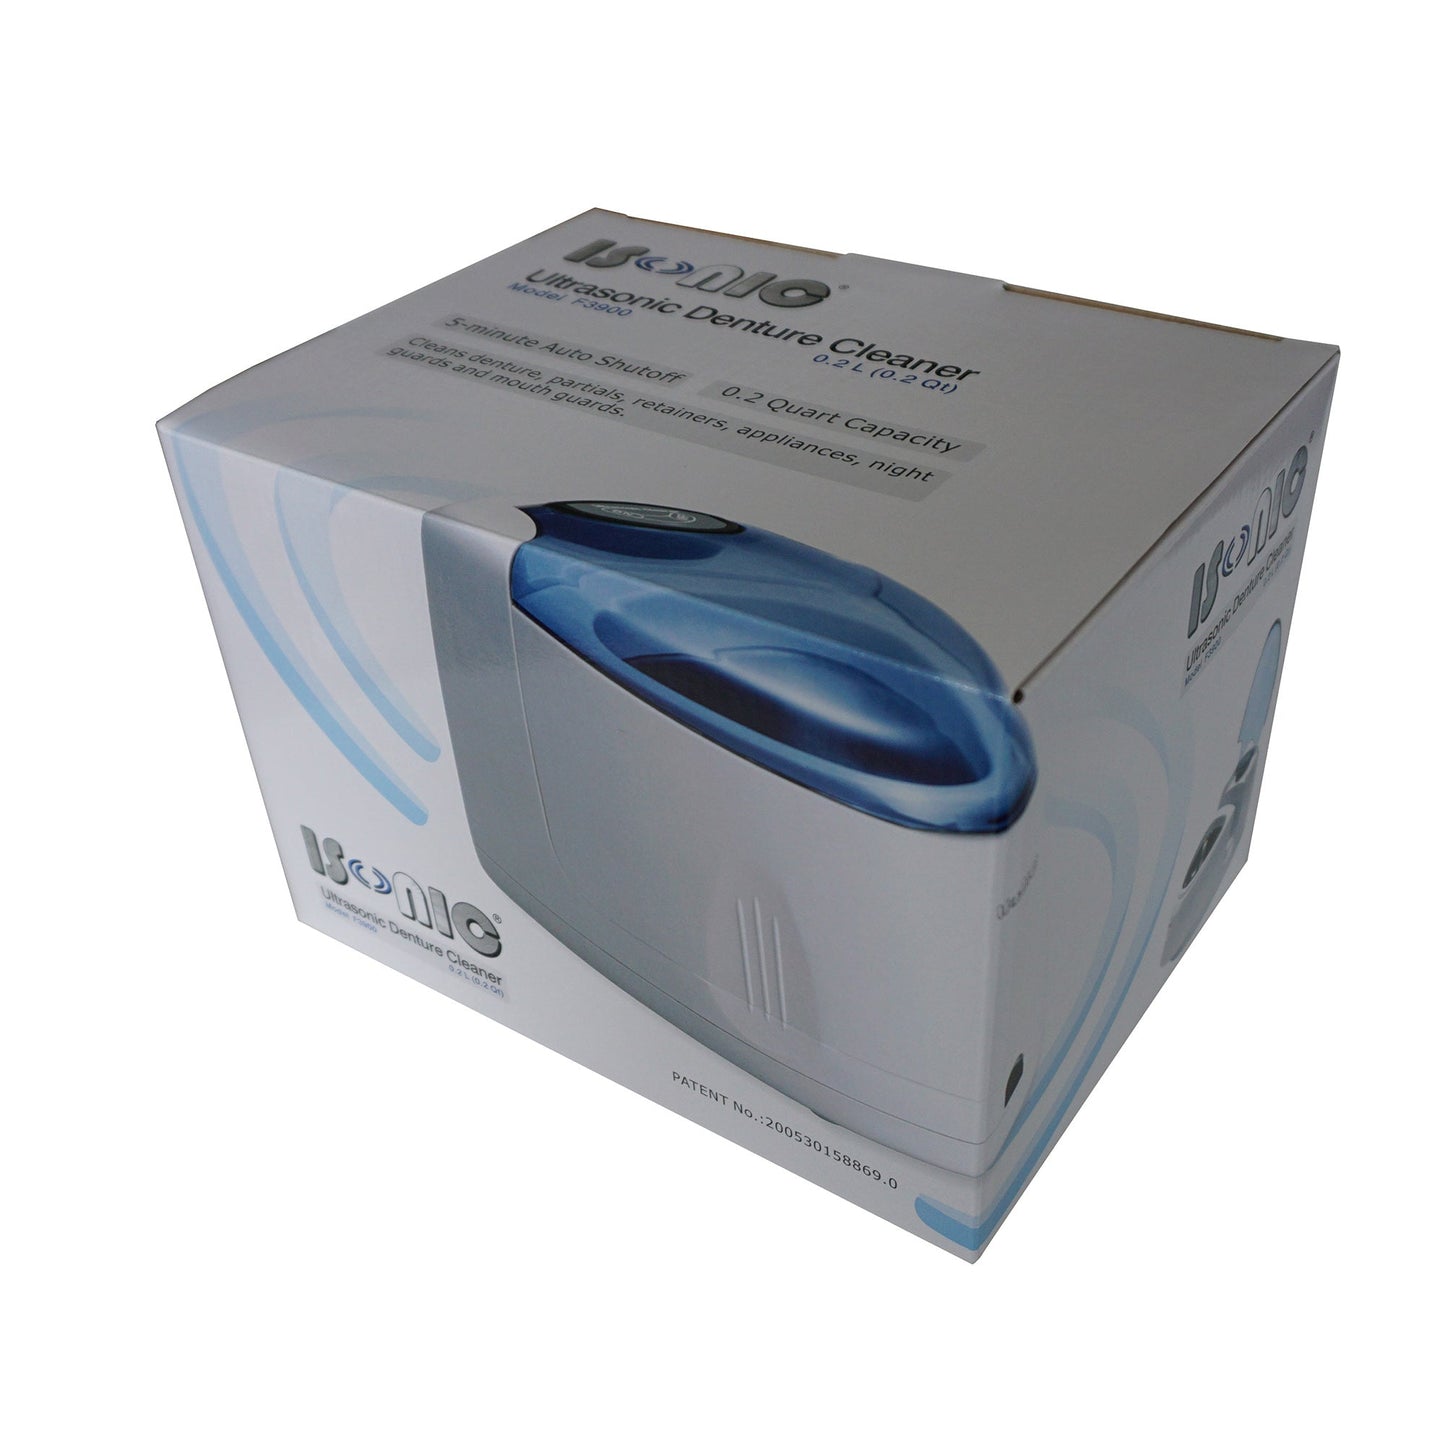 F3900+CSDW01 | iSonic® Ultrasonic Denture/Aligner/Retainer Cleaner plus 8OZ Cleaning Crystal, Free Shipping!